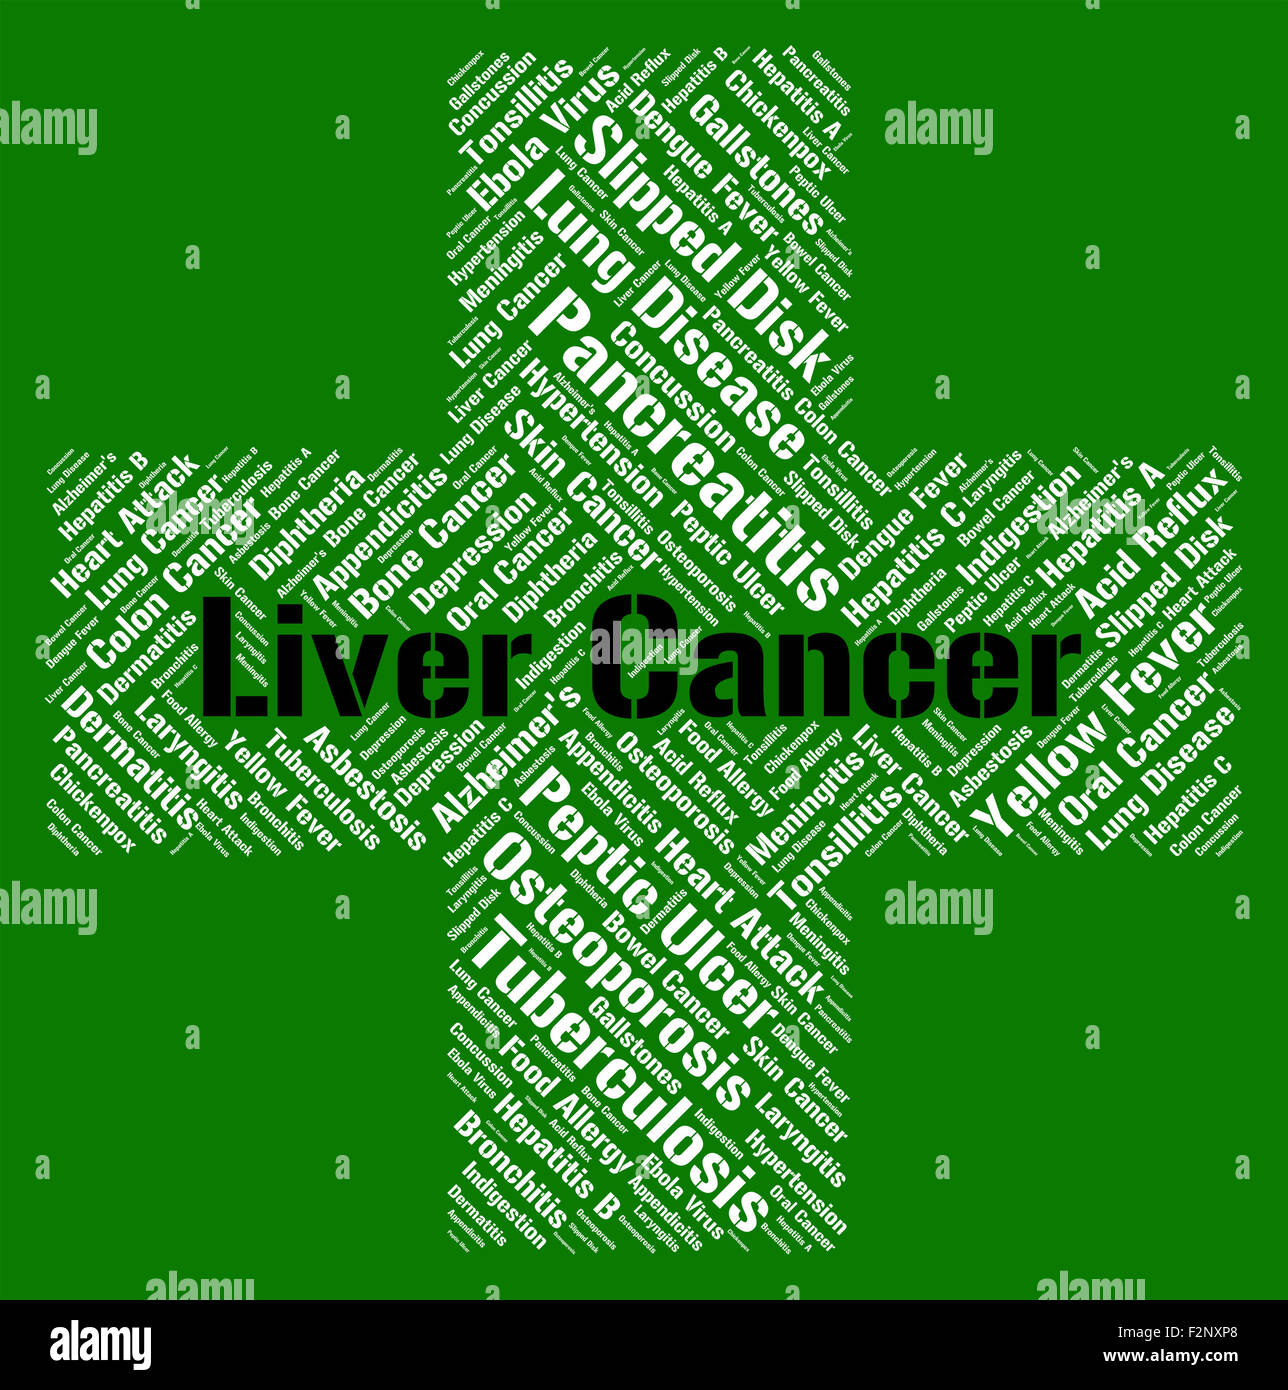 Liver Cancer Showing Malignant Growth And Malignancy Stock Photo